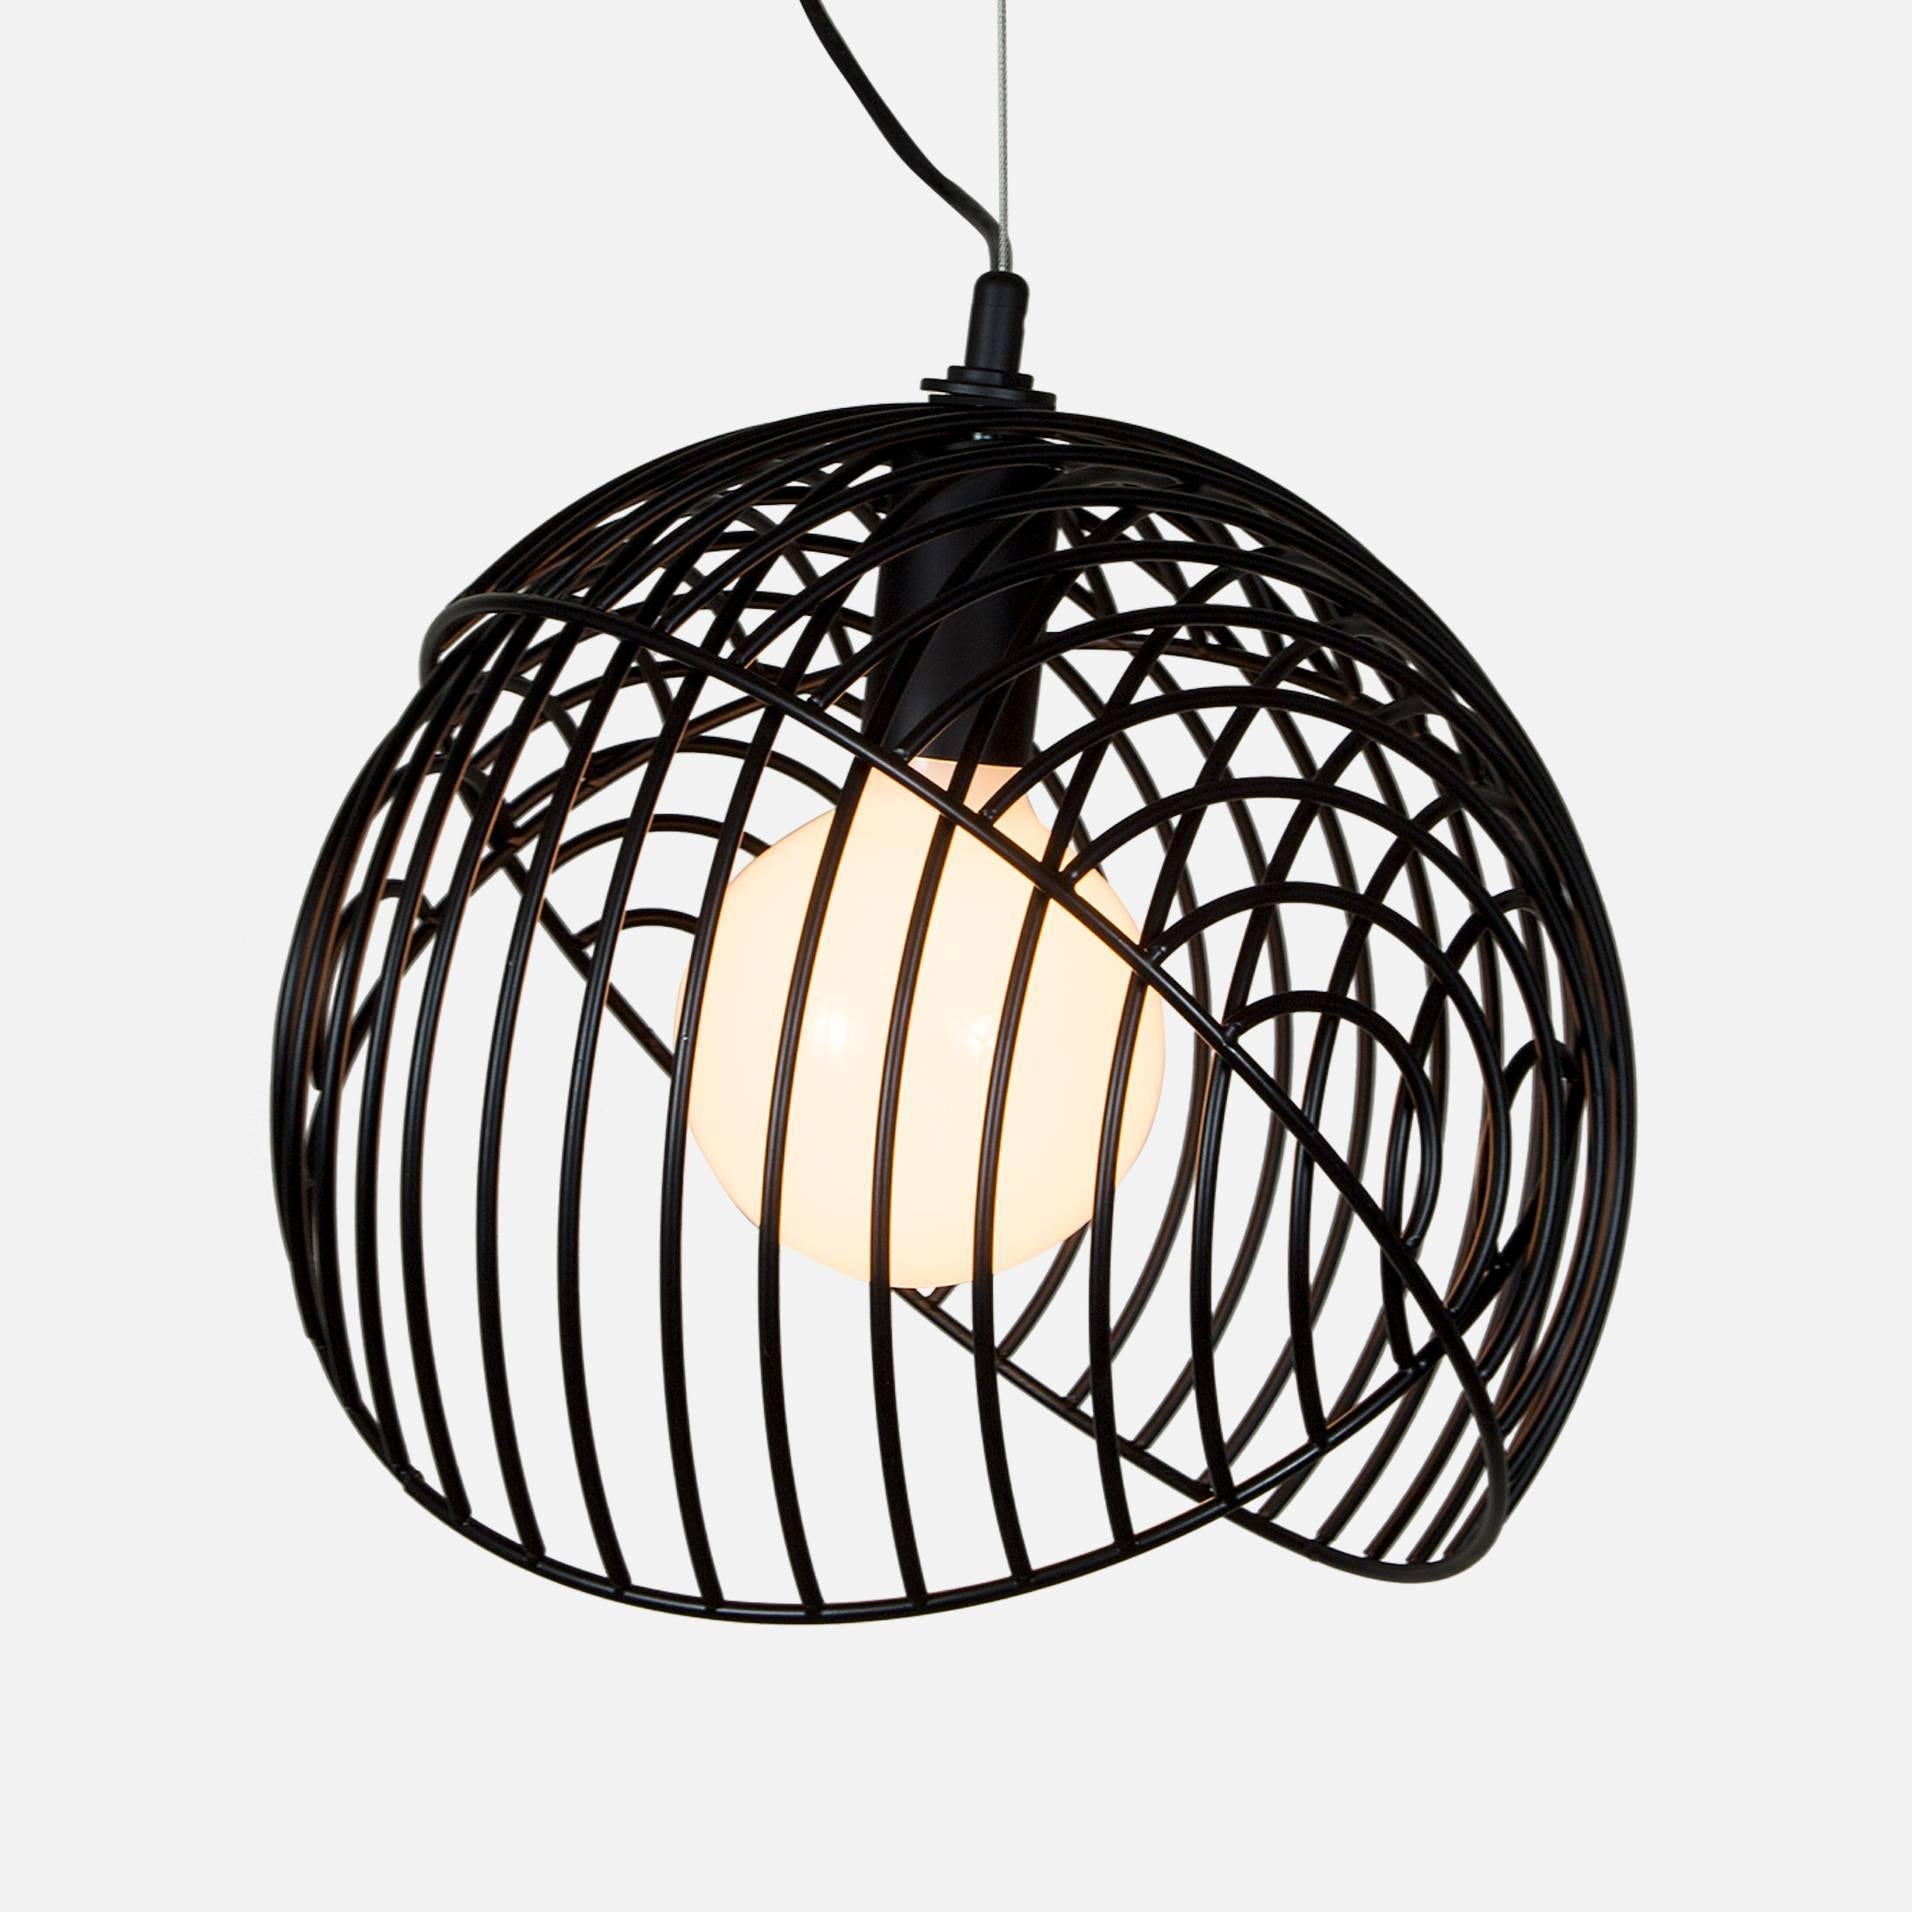 American Dana Pendant Light, Black, Cluster of Three, from Souda, Made to Order For Sale